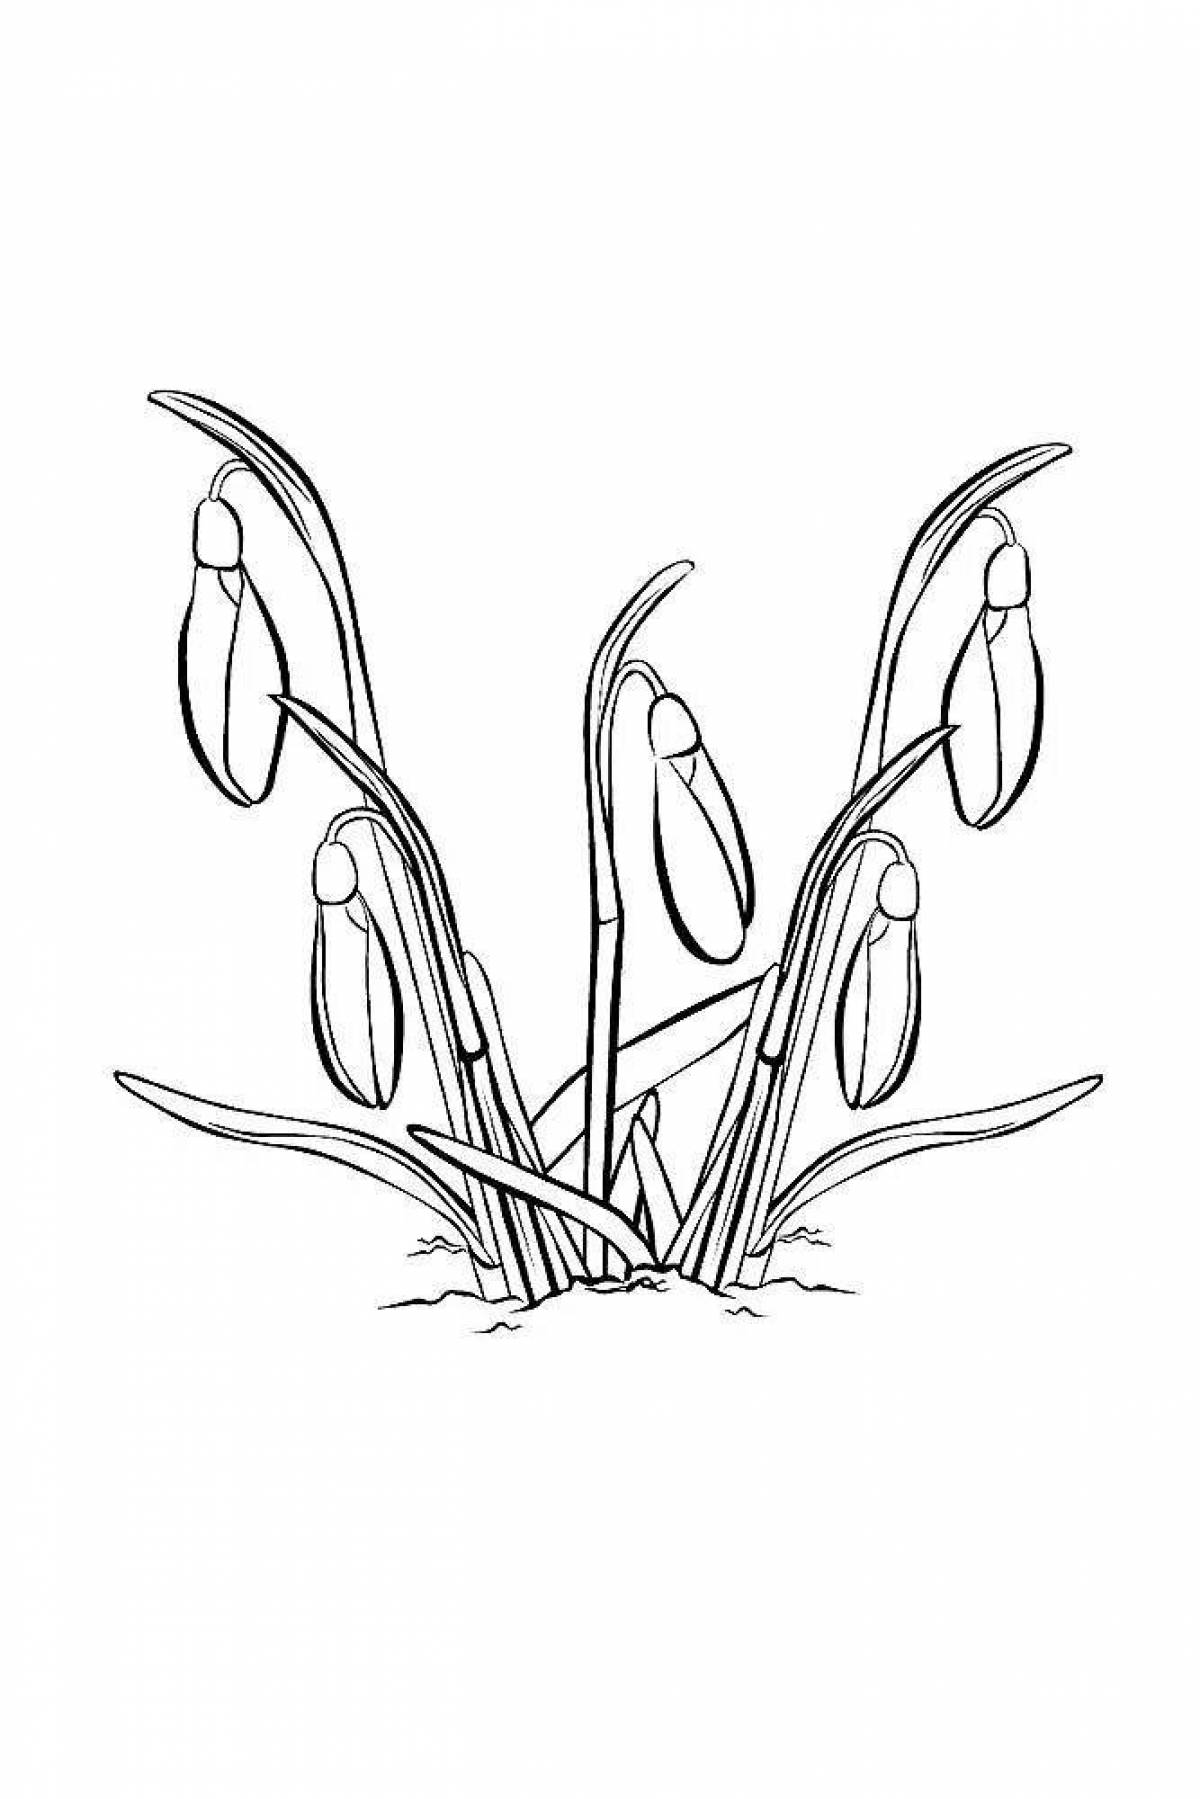 Playful snowdrop coloring page for kids